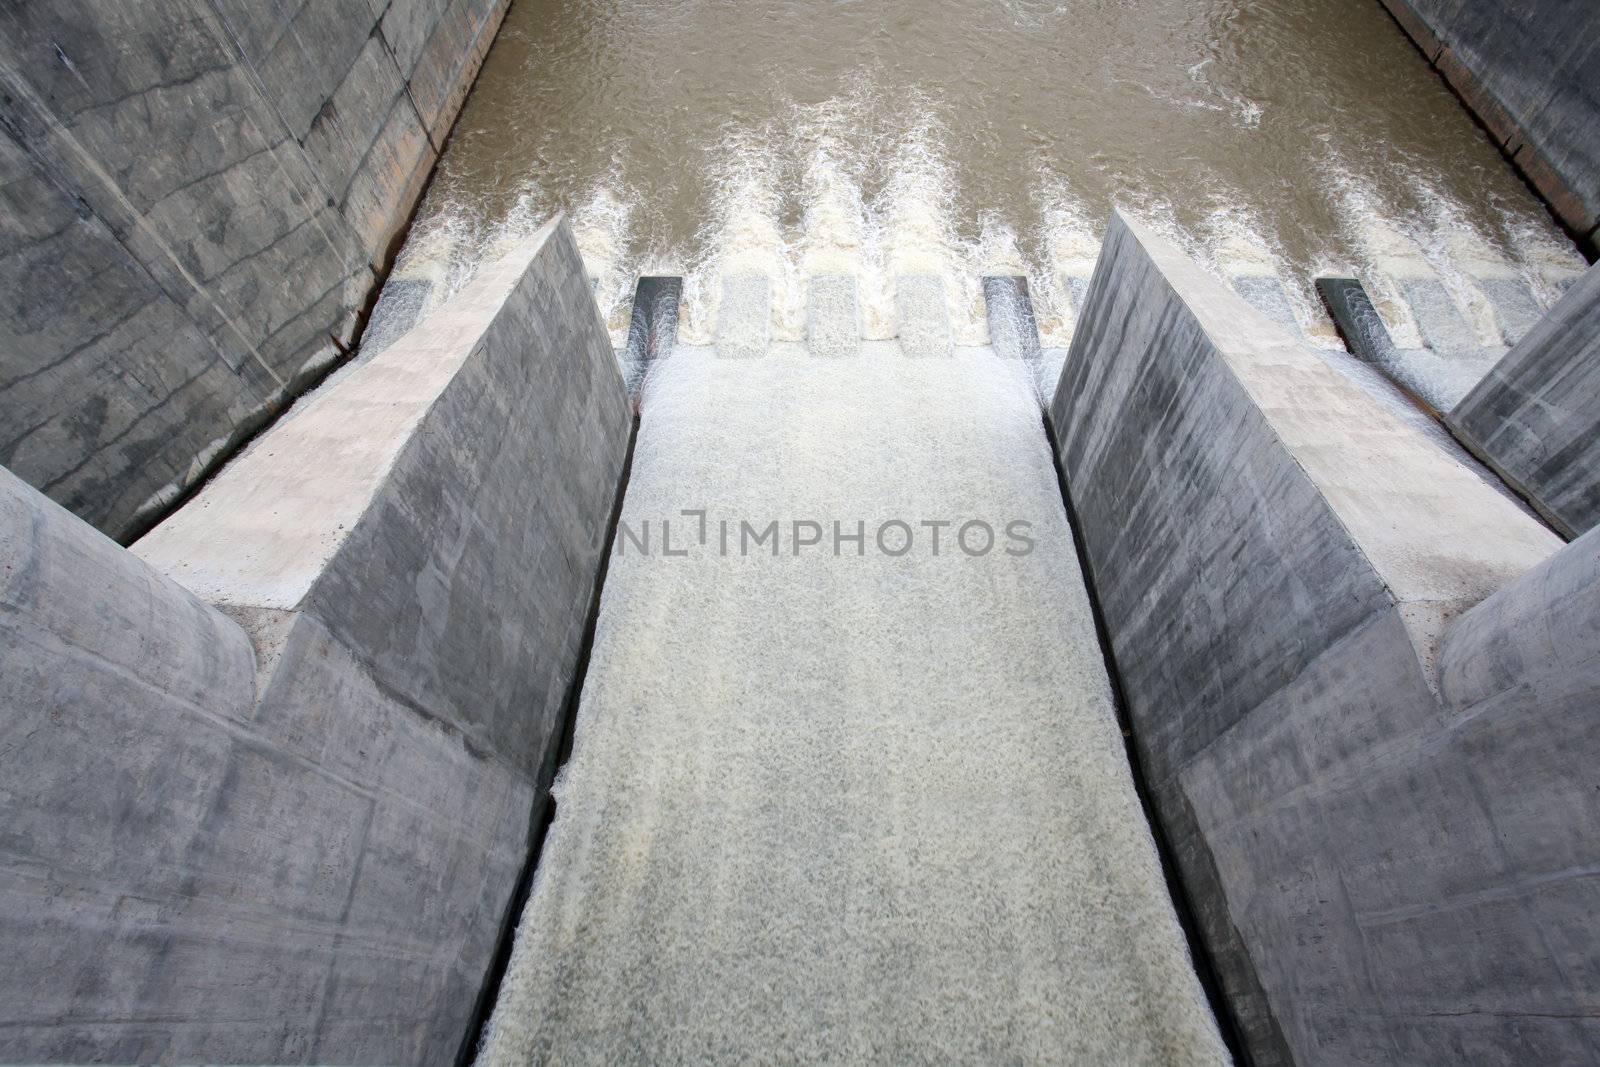 Water pouring through the water gates at dam